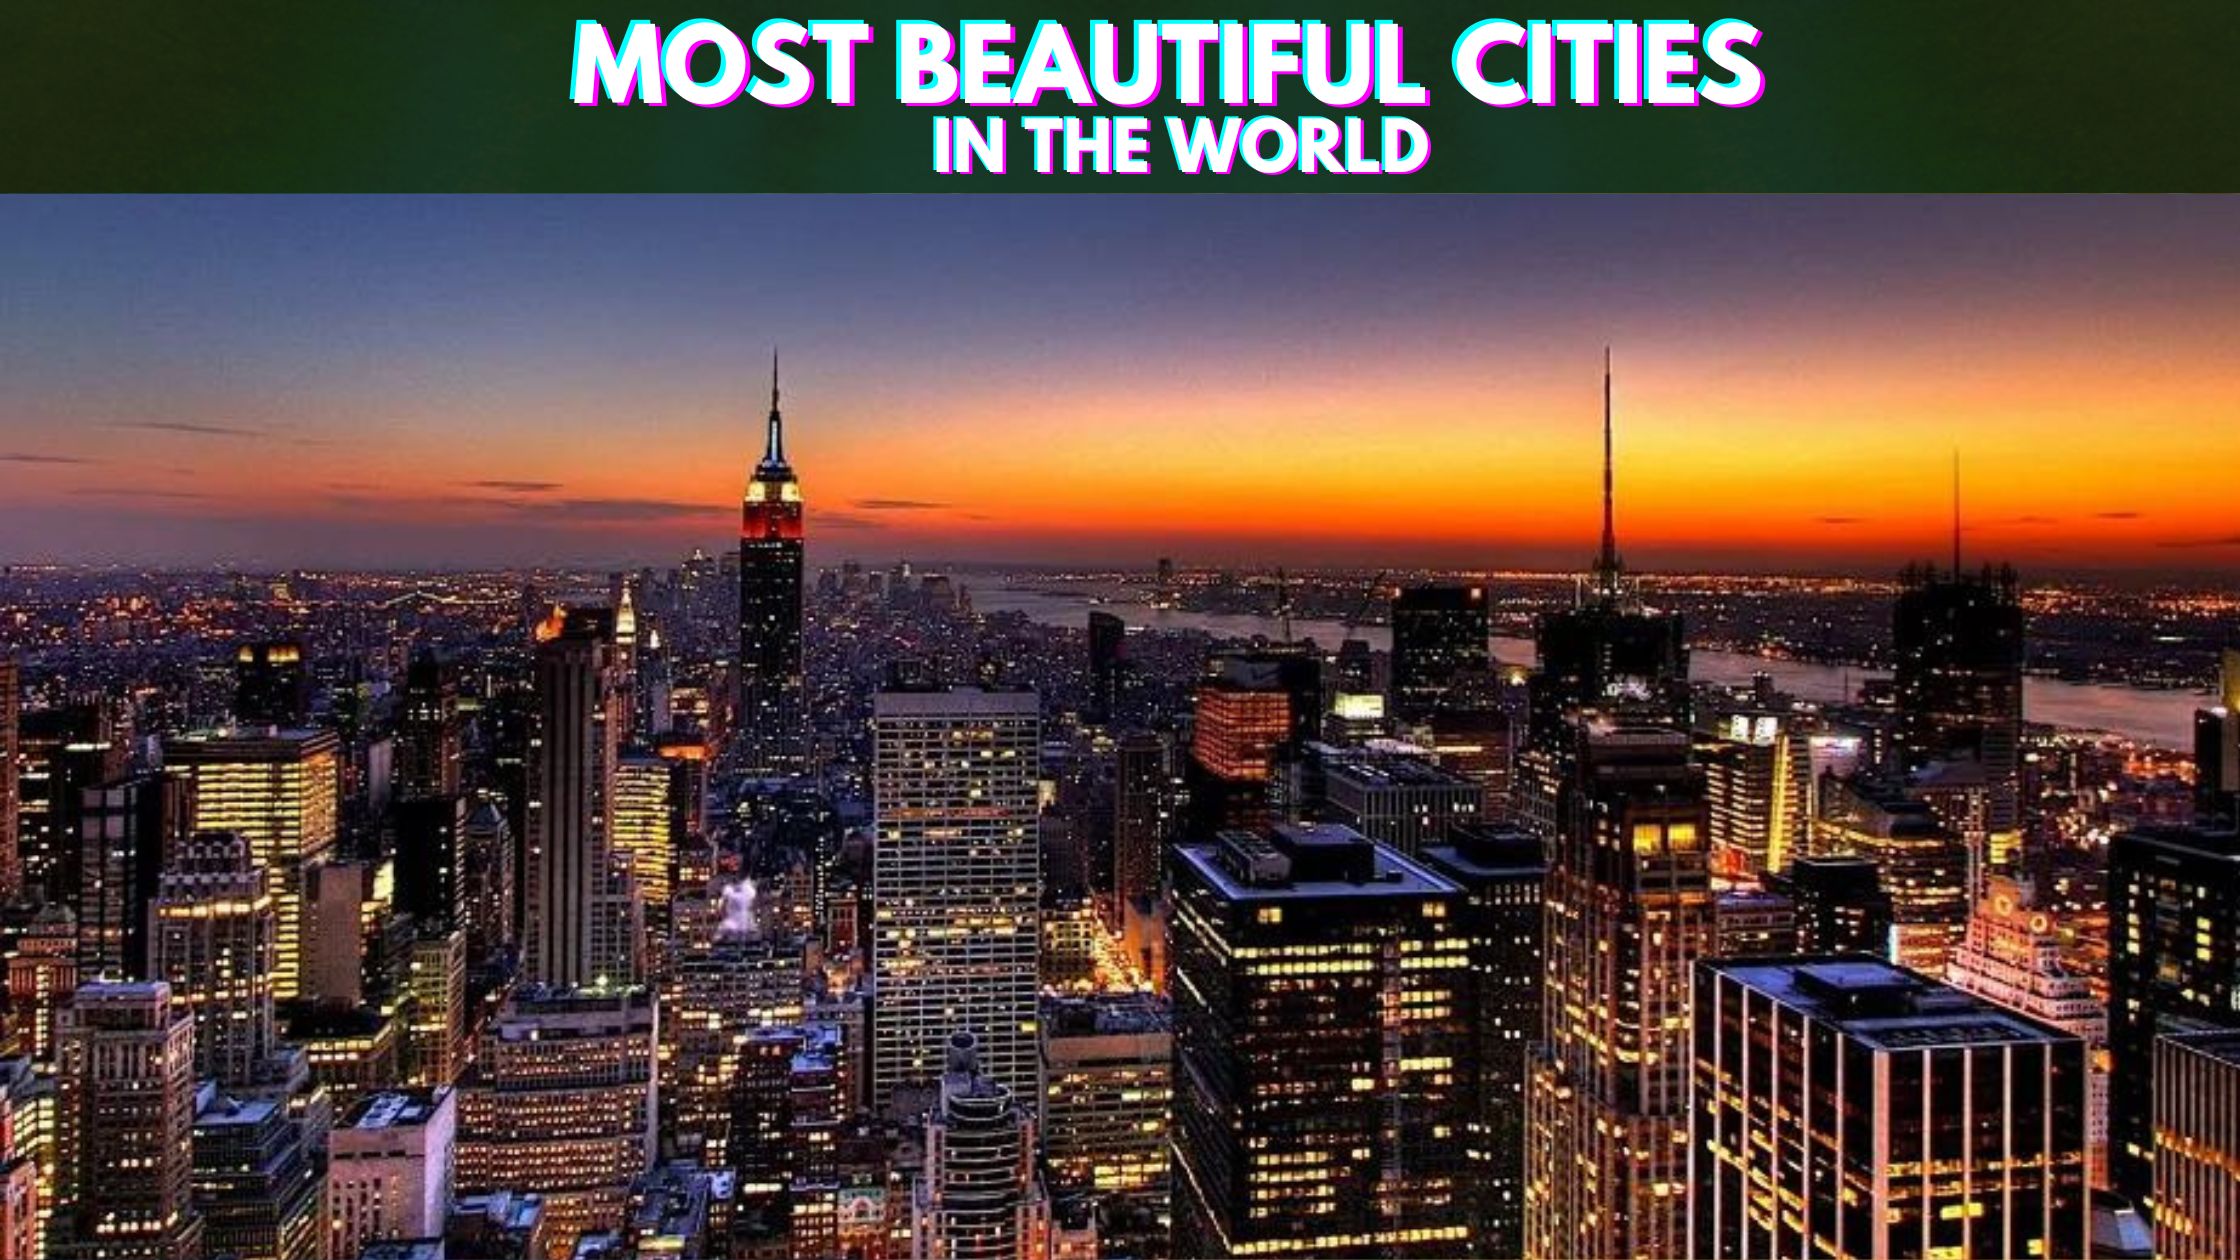 Most Beautiful Cities In The World (1)